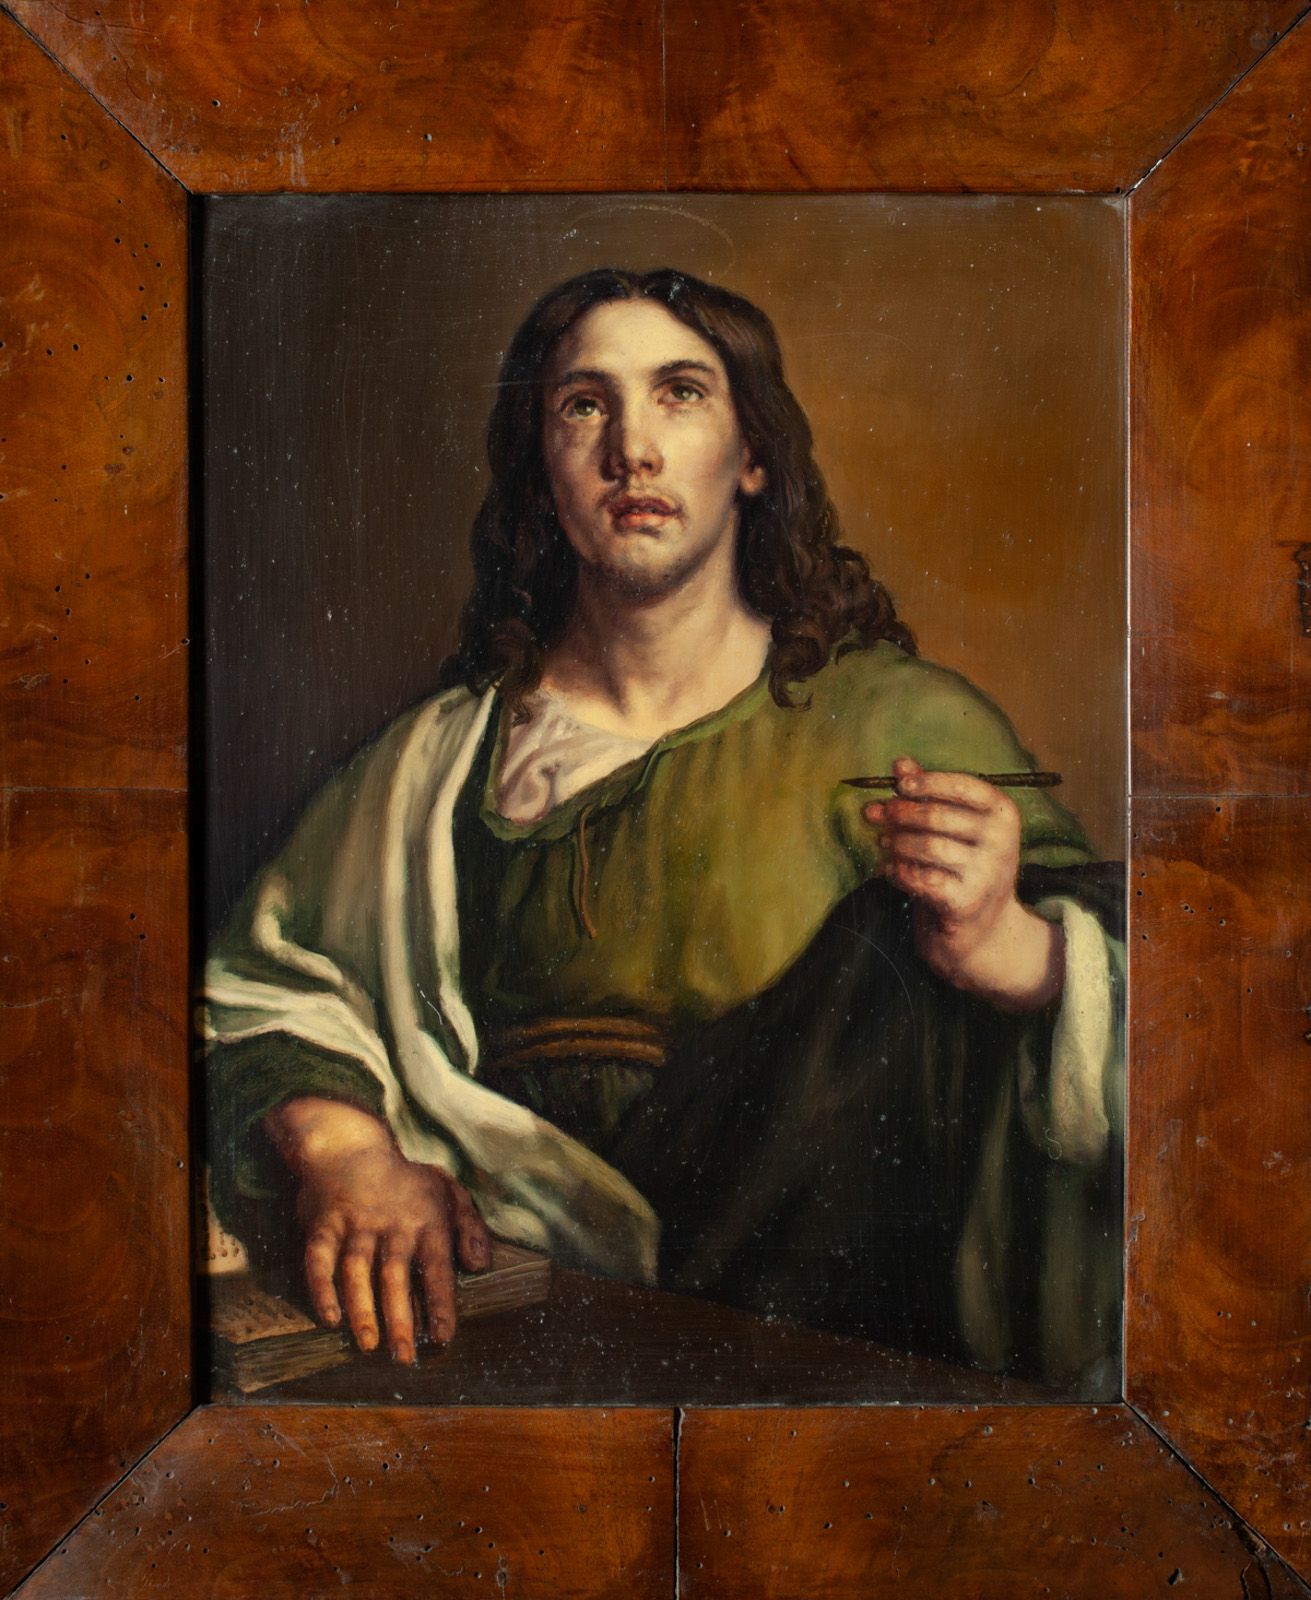 Null Portrait of Christ

Oil on copper, in a wooden frame

43 x 33 cm.